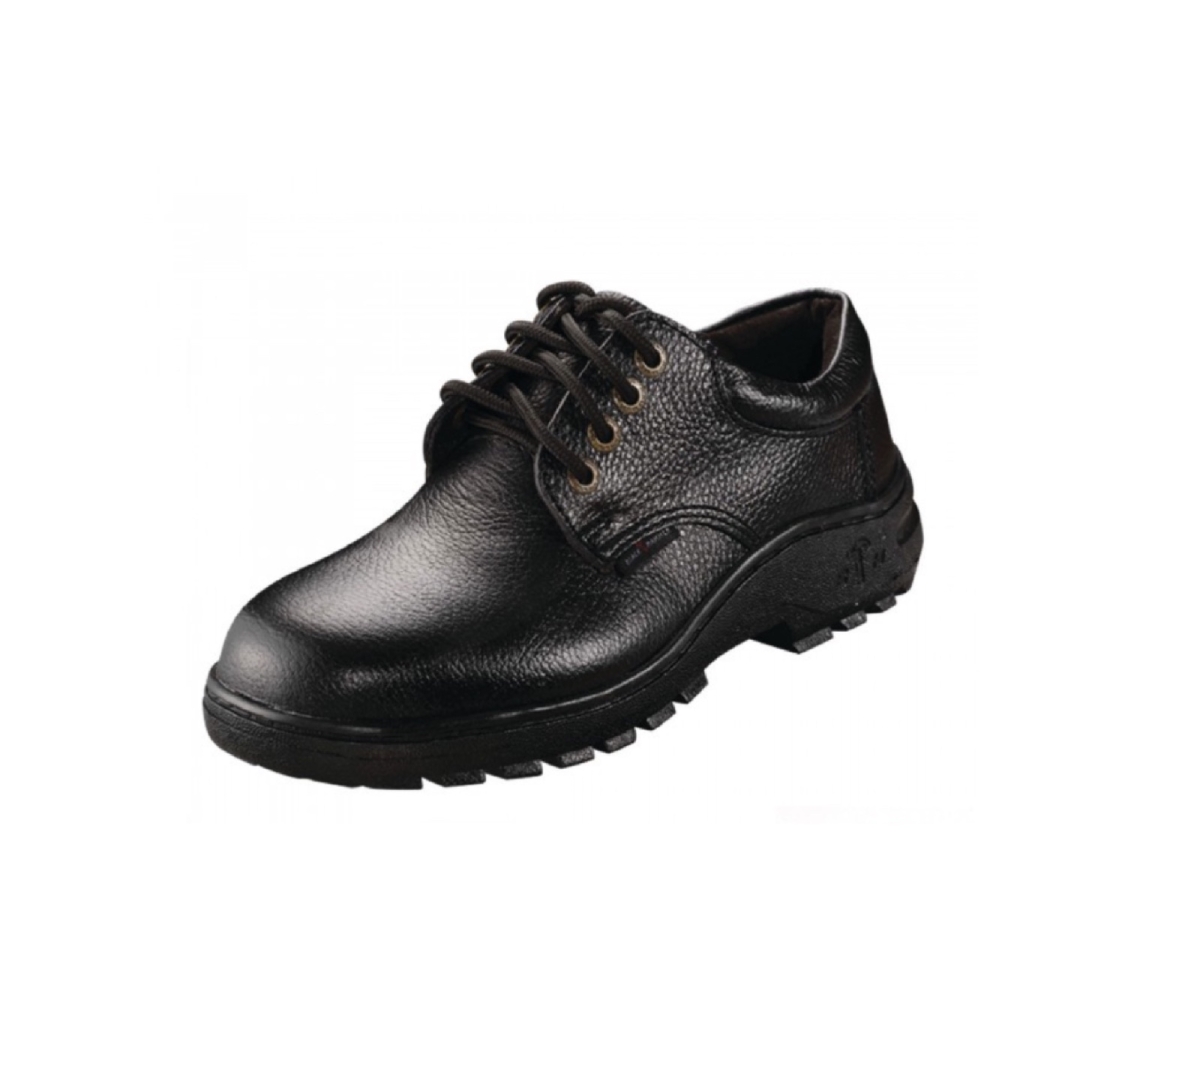 Black Hammer BH2331 2000 Series Low Cut Lace Up Safety Shoes Black Hammer  Safety Shoes Selangor,